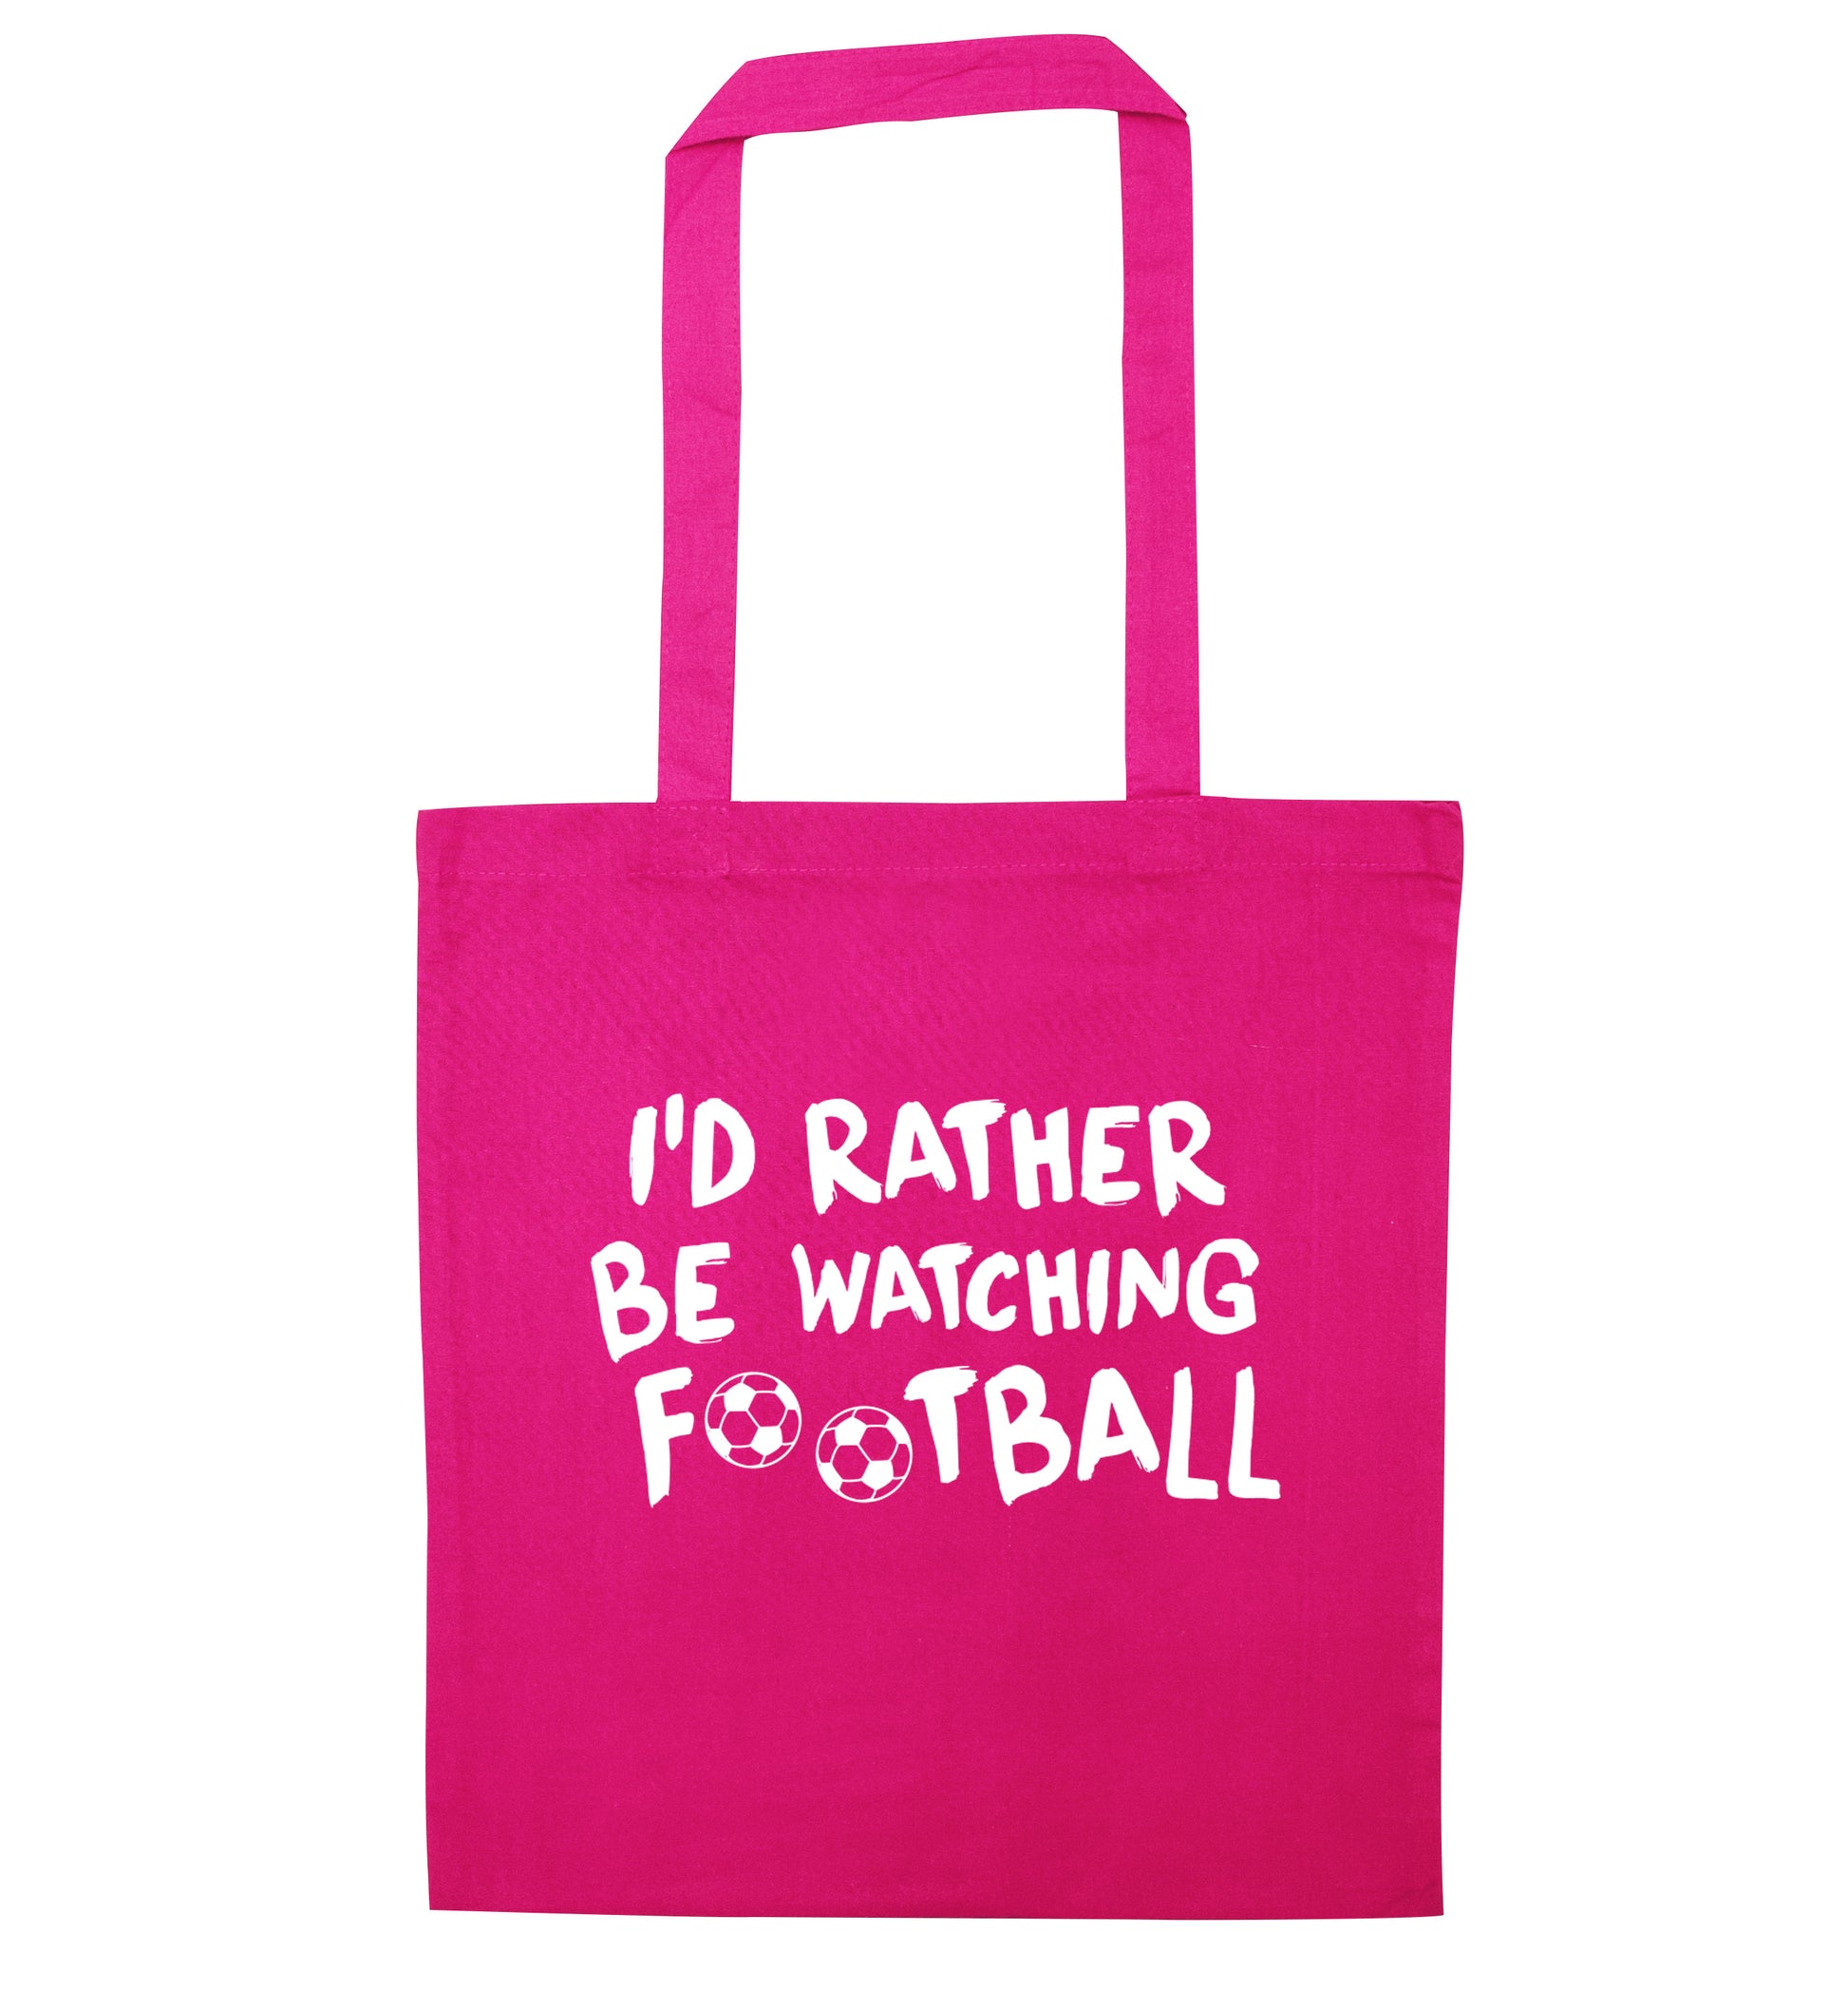 I'd rather be watching football pink tote bag